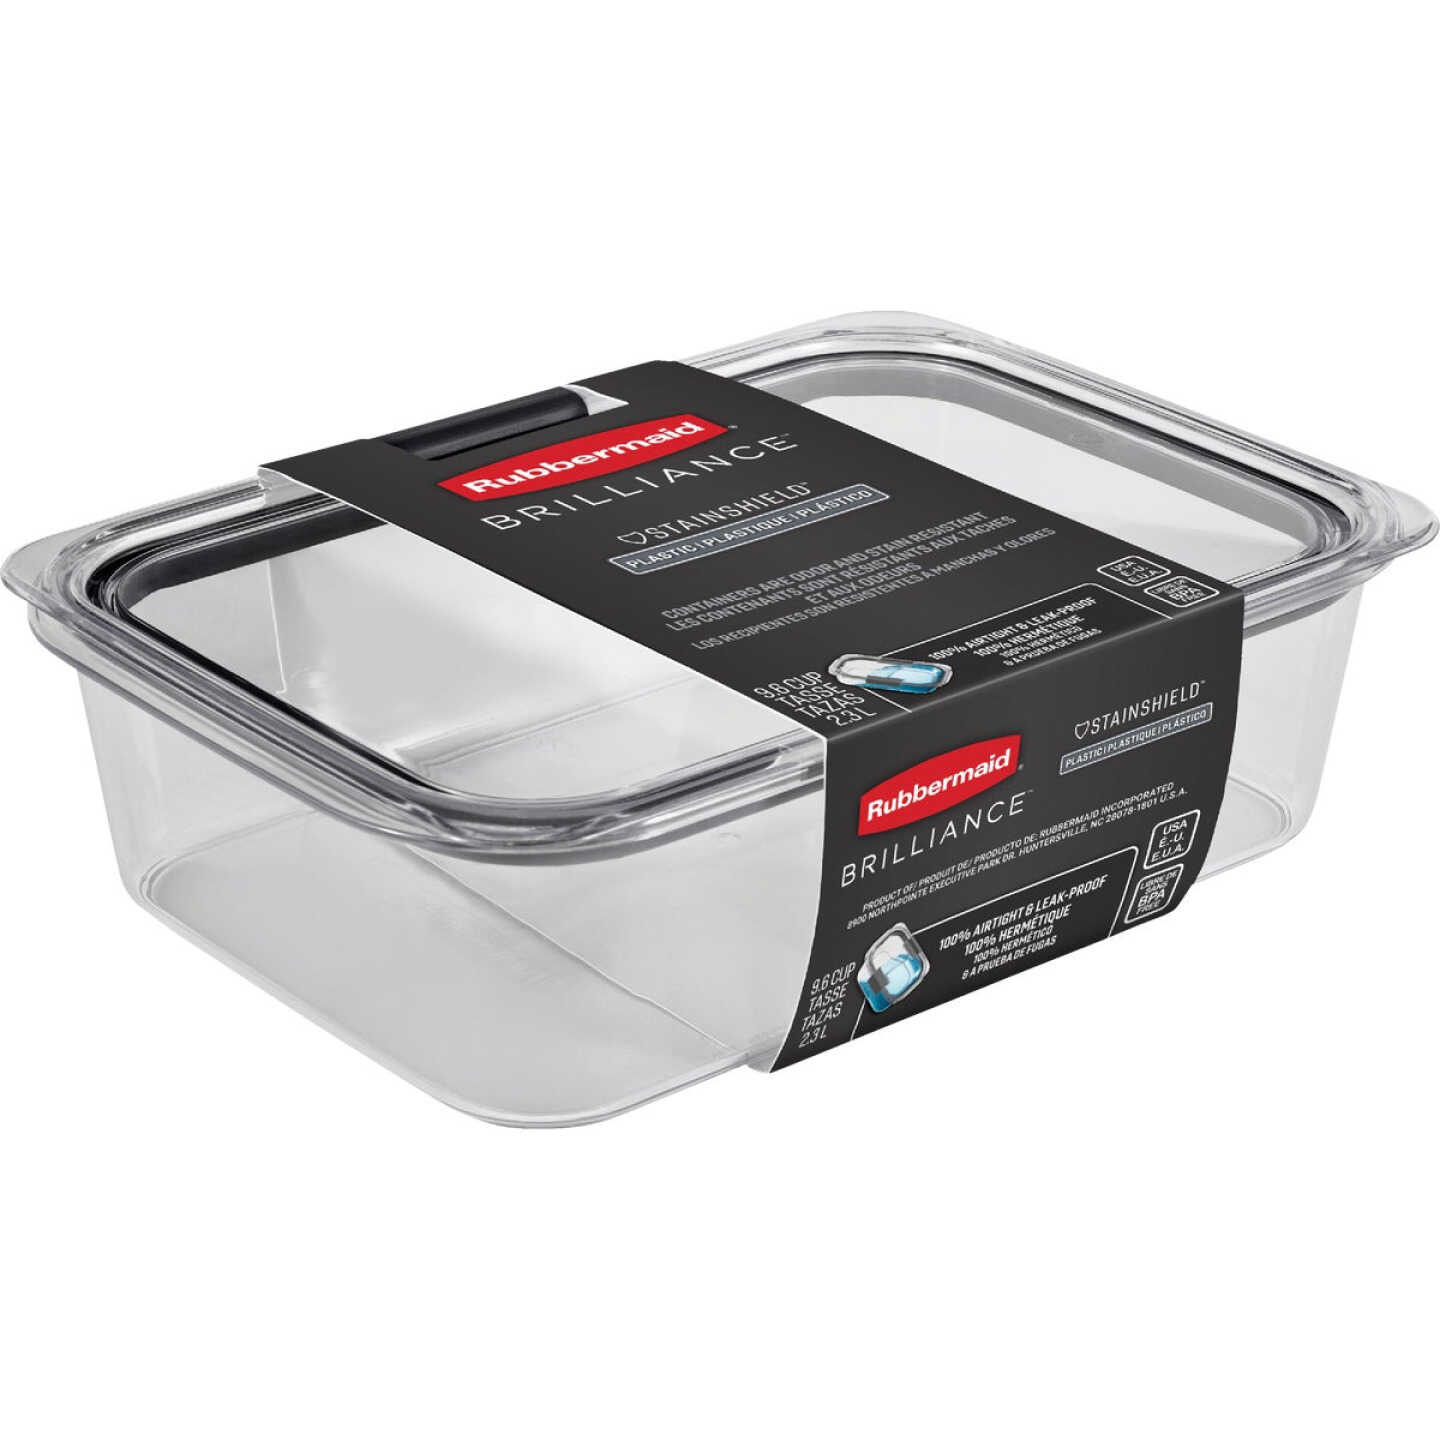 Save on Rubbermaid Brilliance Container with Lid Deep Medium 4.7